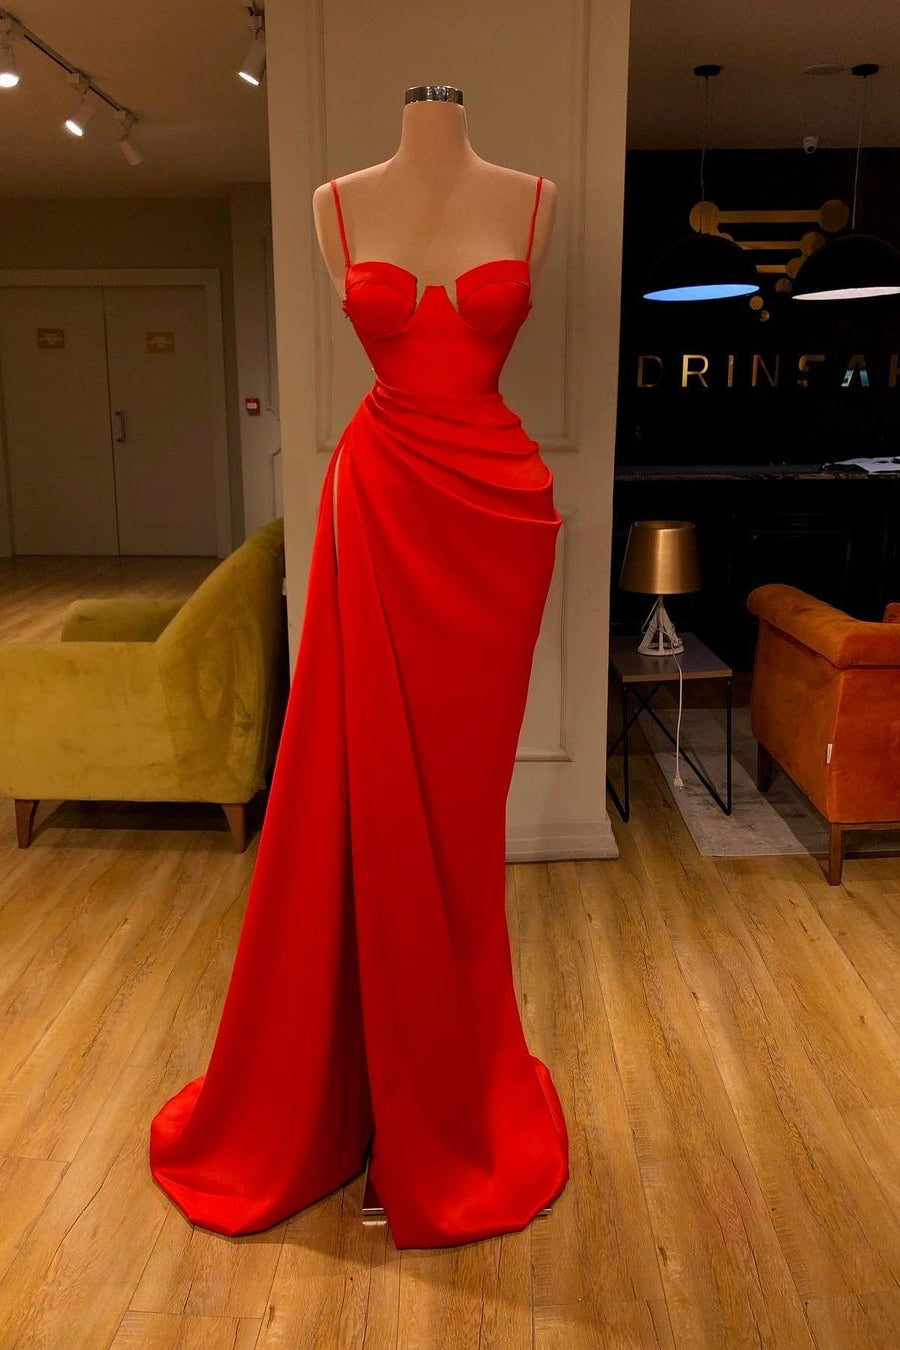 Gorgeous Spaghetti Strap Unique Round Cup High split Red Corset Prom Dress outfits, Party Dress Size 198